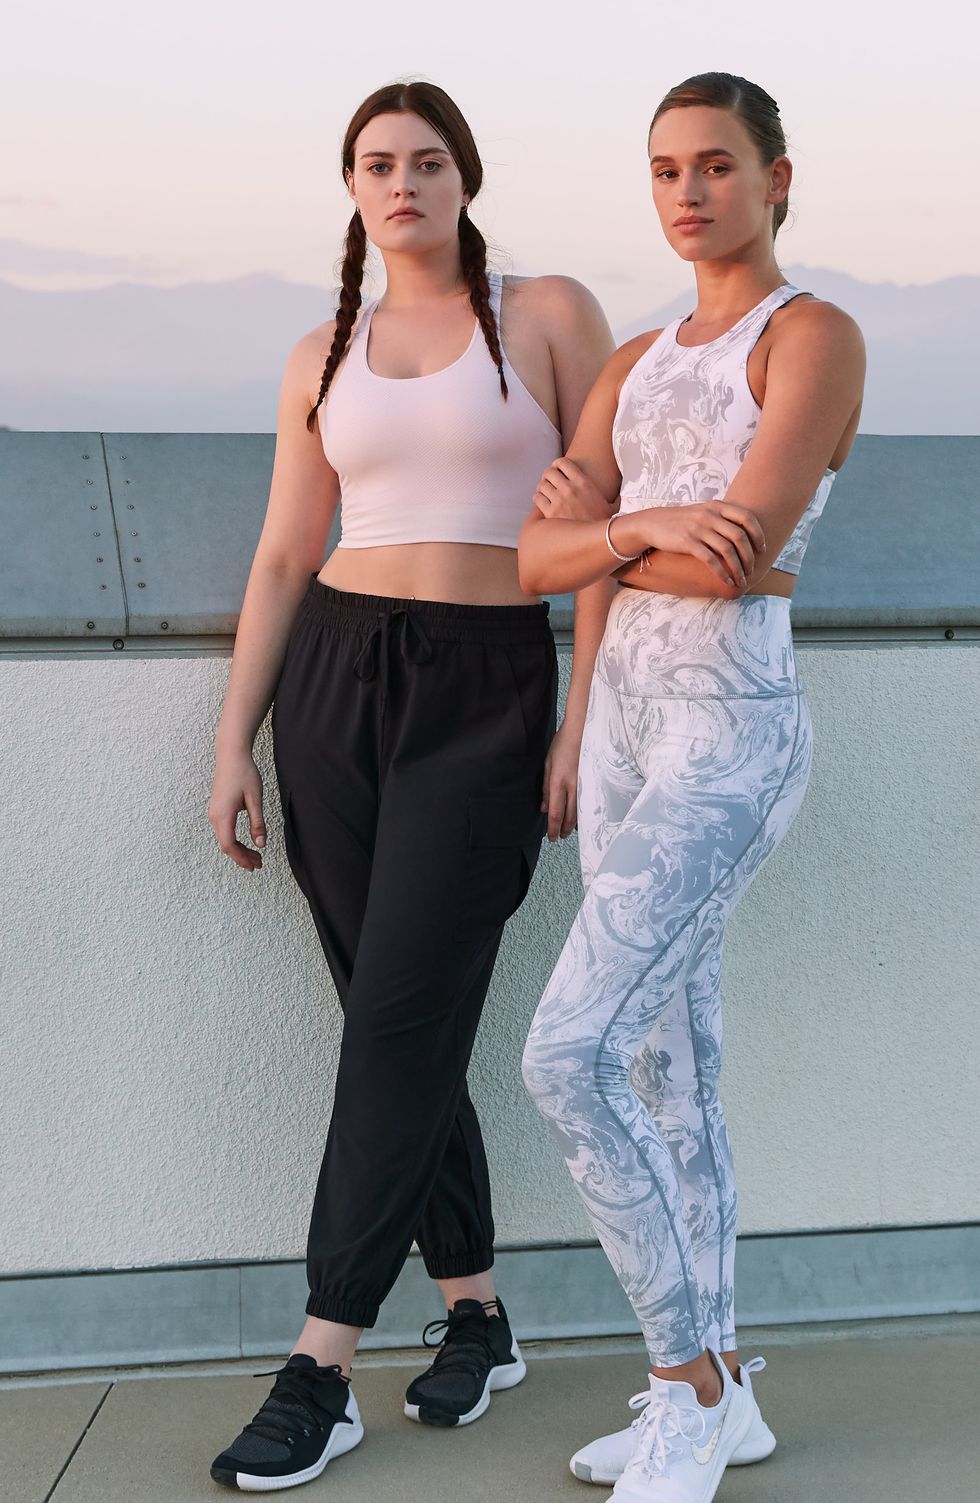 Zella's Live In High Waist Leggings Are 33% Off for Black Friday